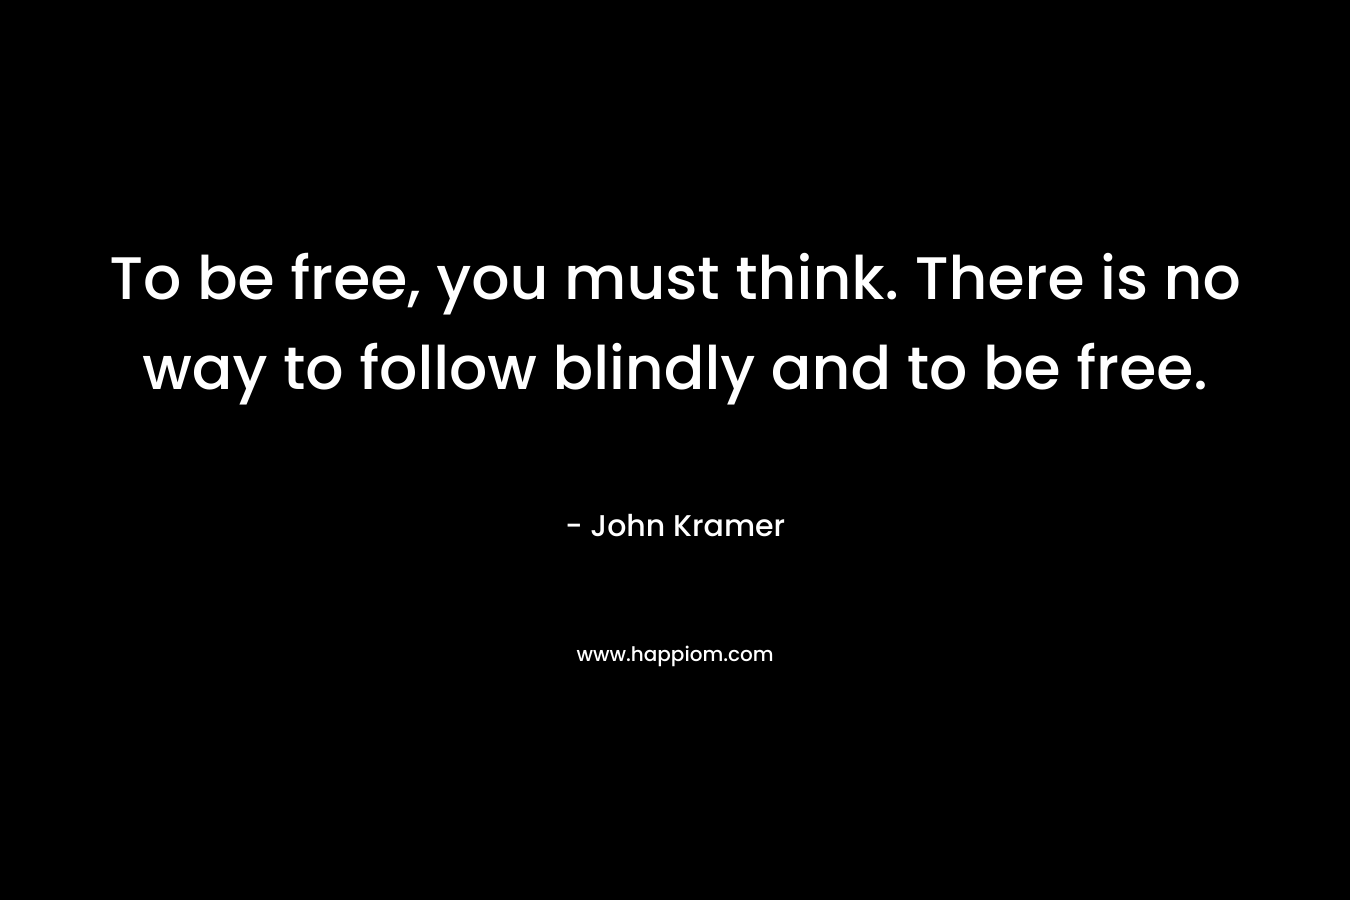 To be free, you must think. There is no way to follow blindly and to be free.